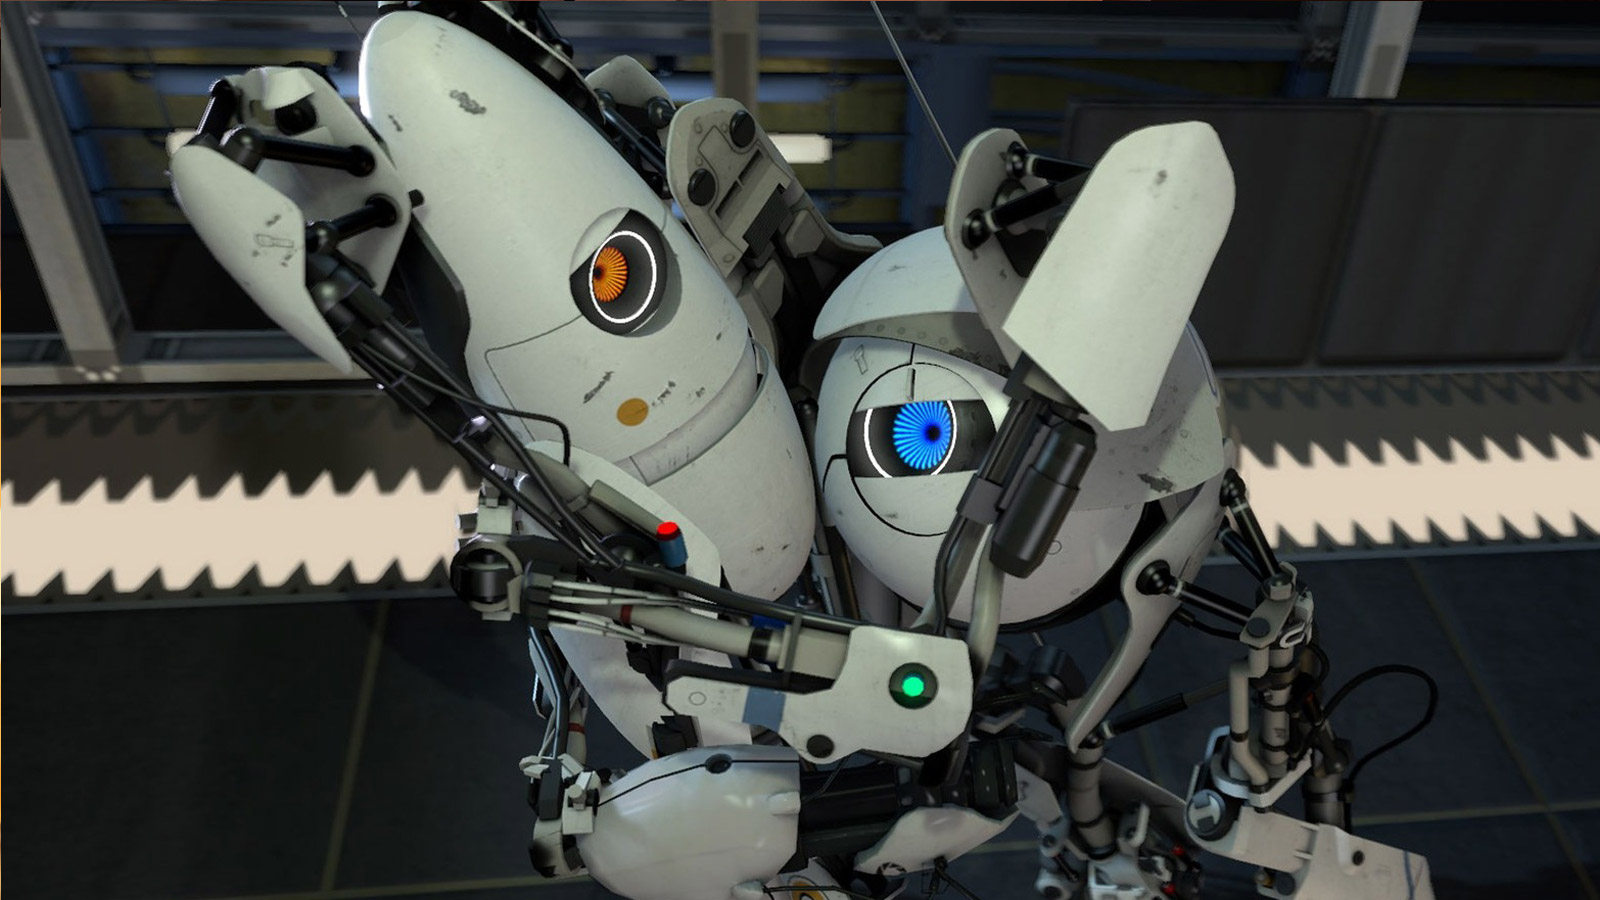 whats the story of portal and portal 2